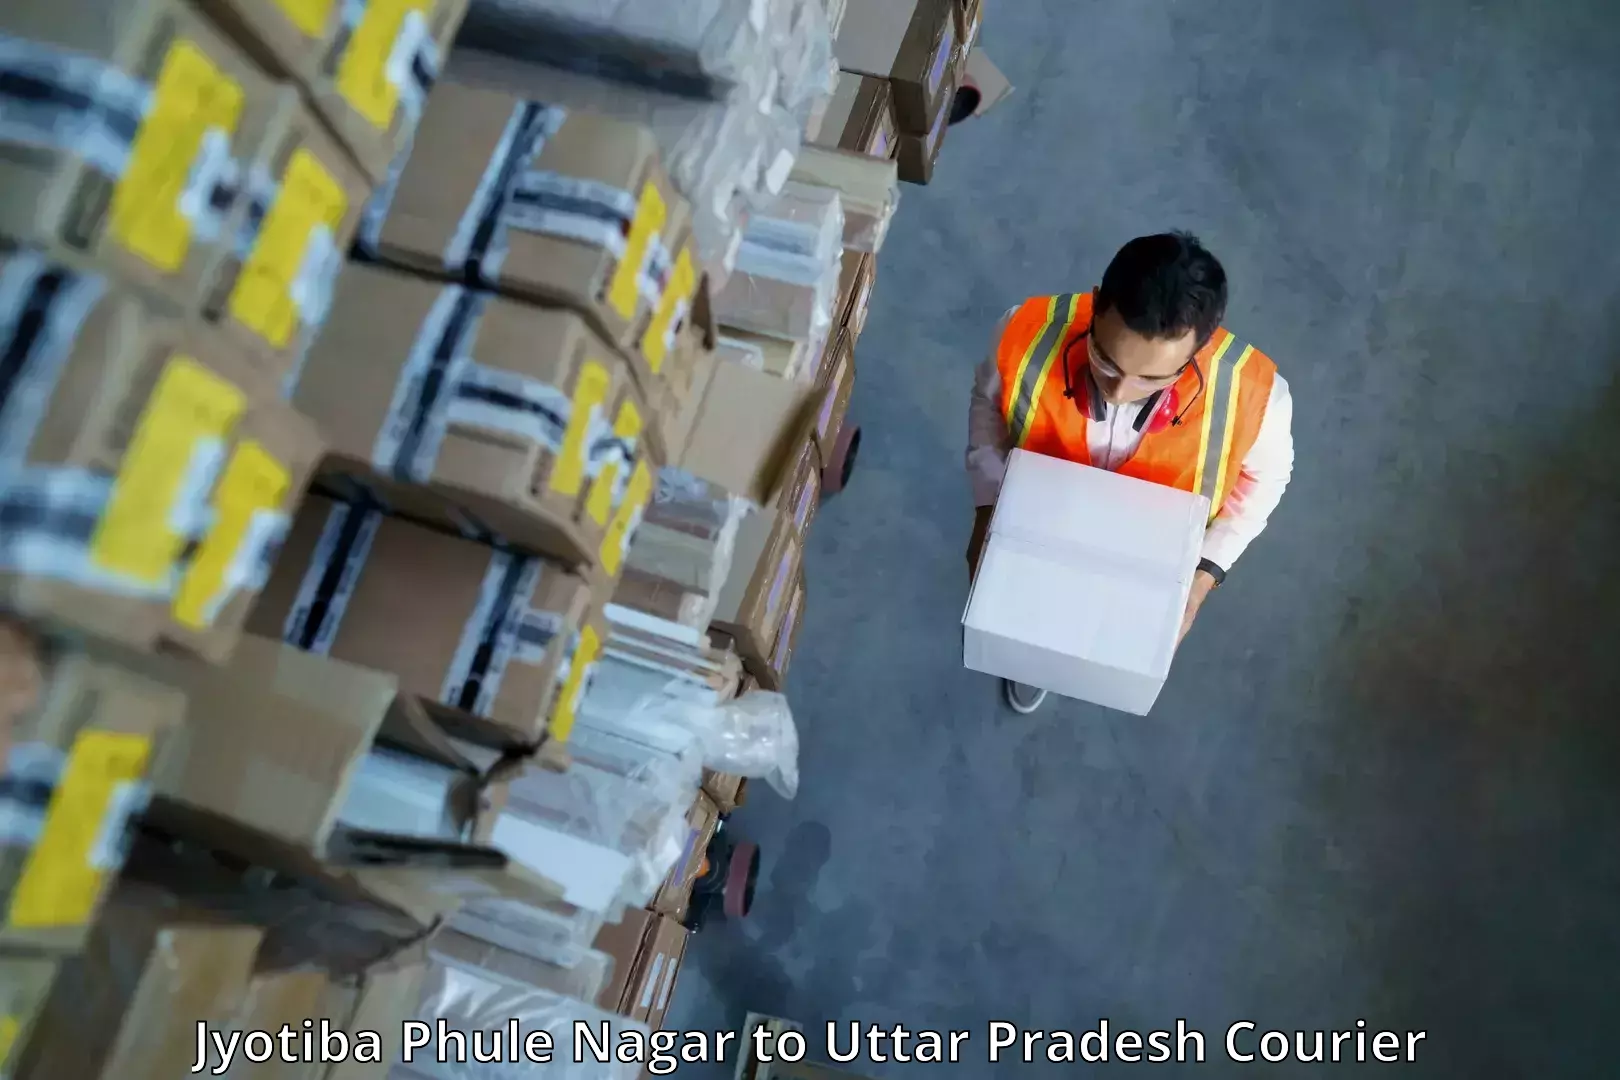 State-of-the-art courier technology Jyotiba Phule Nagar to Dohrighat